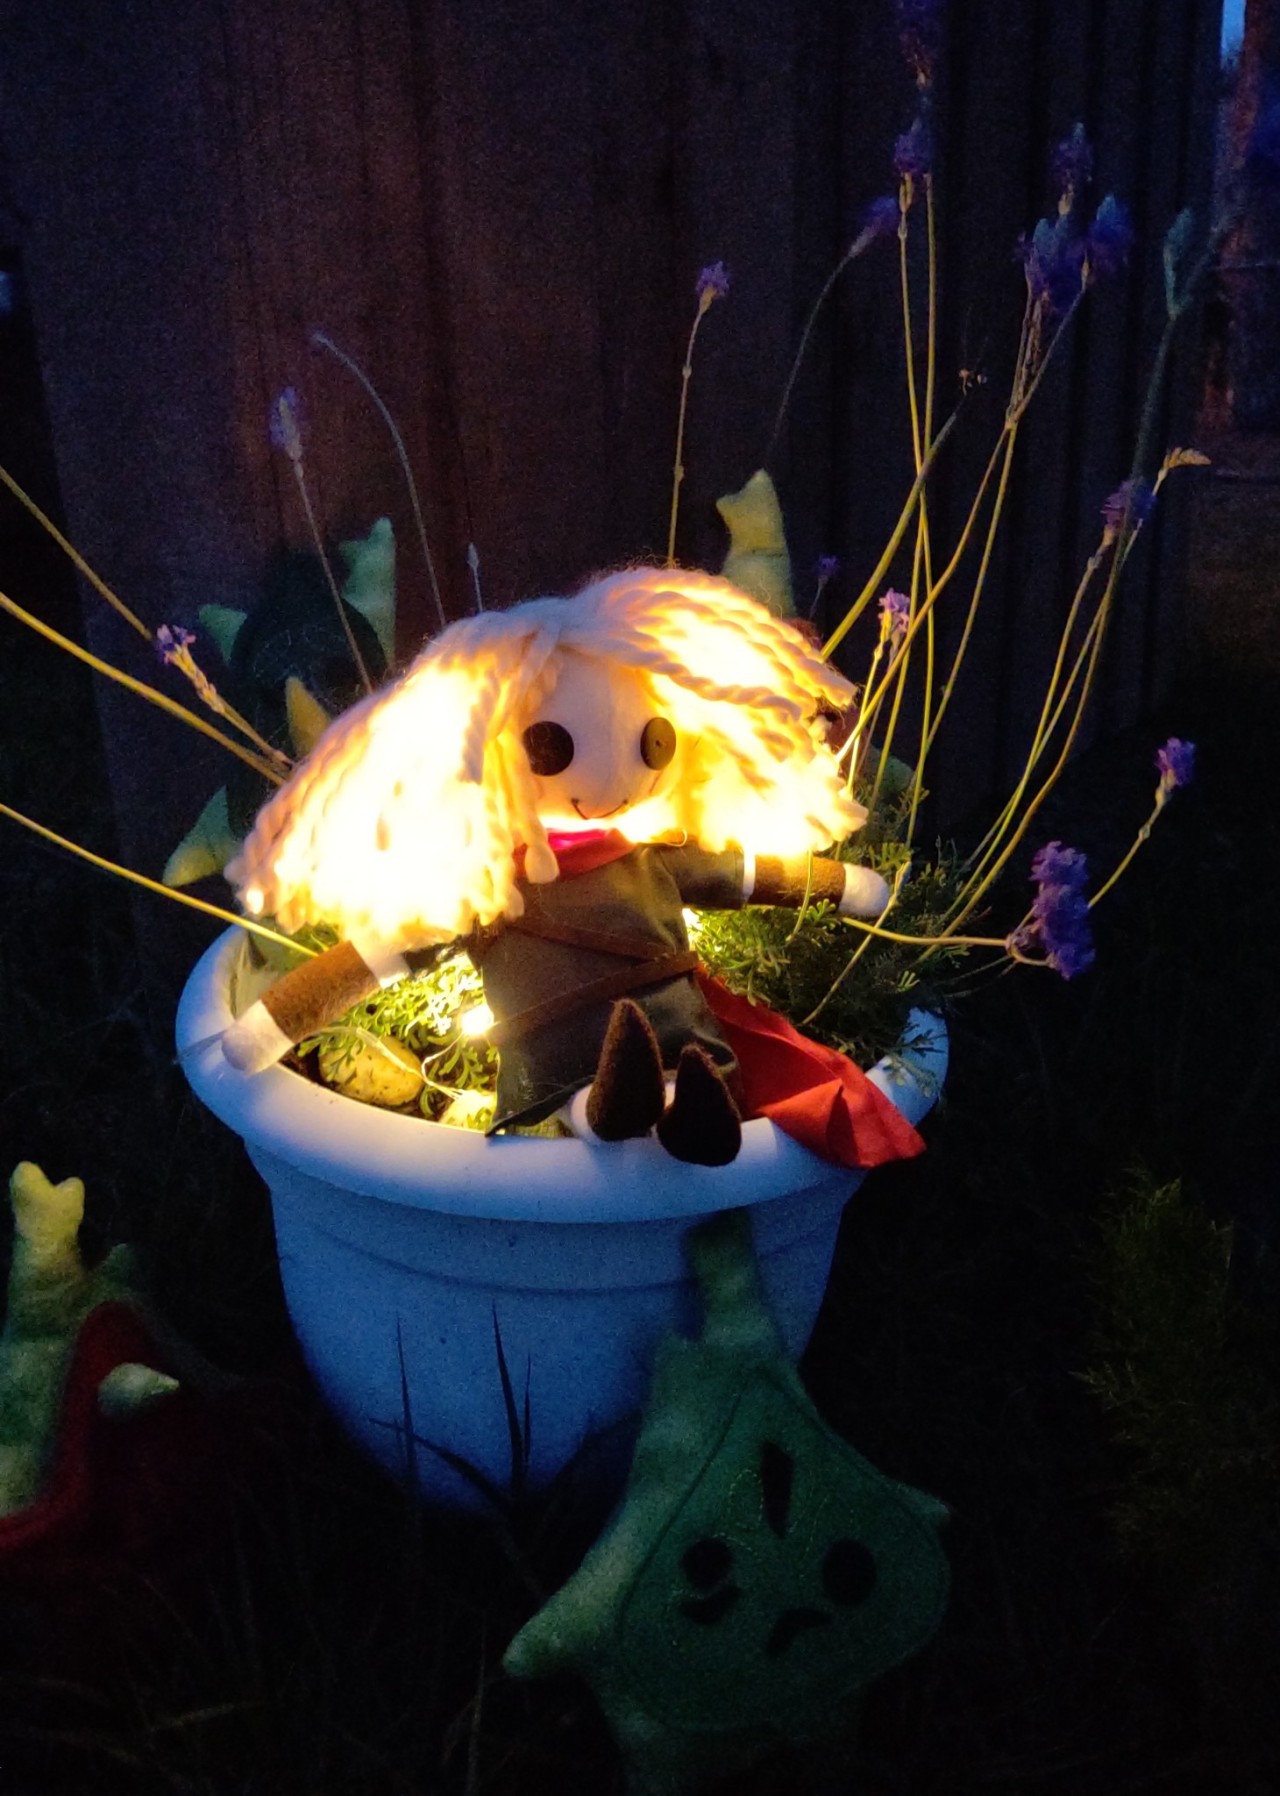 A button-eye doll of the first hero, sitting with a potted plant with lights so it looks as if he's glowing.